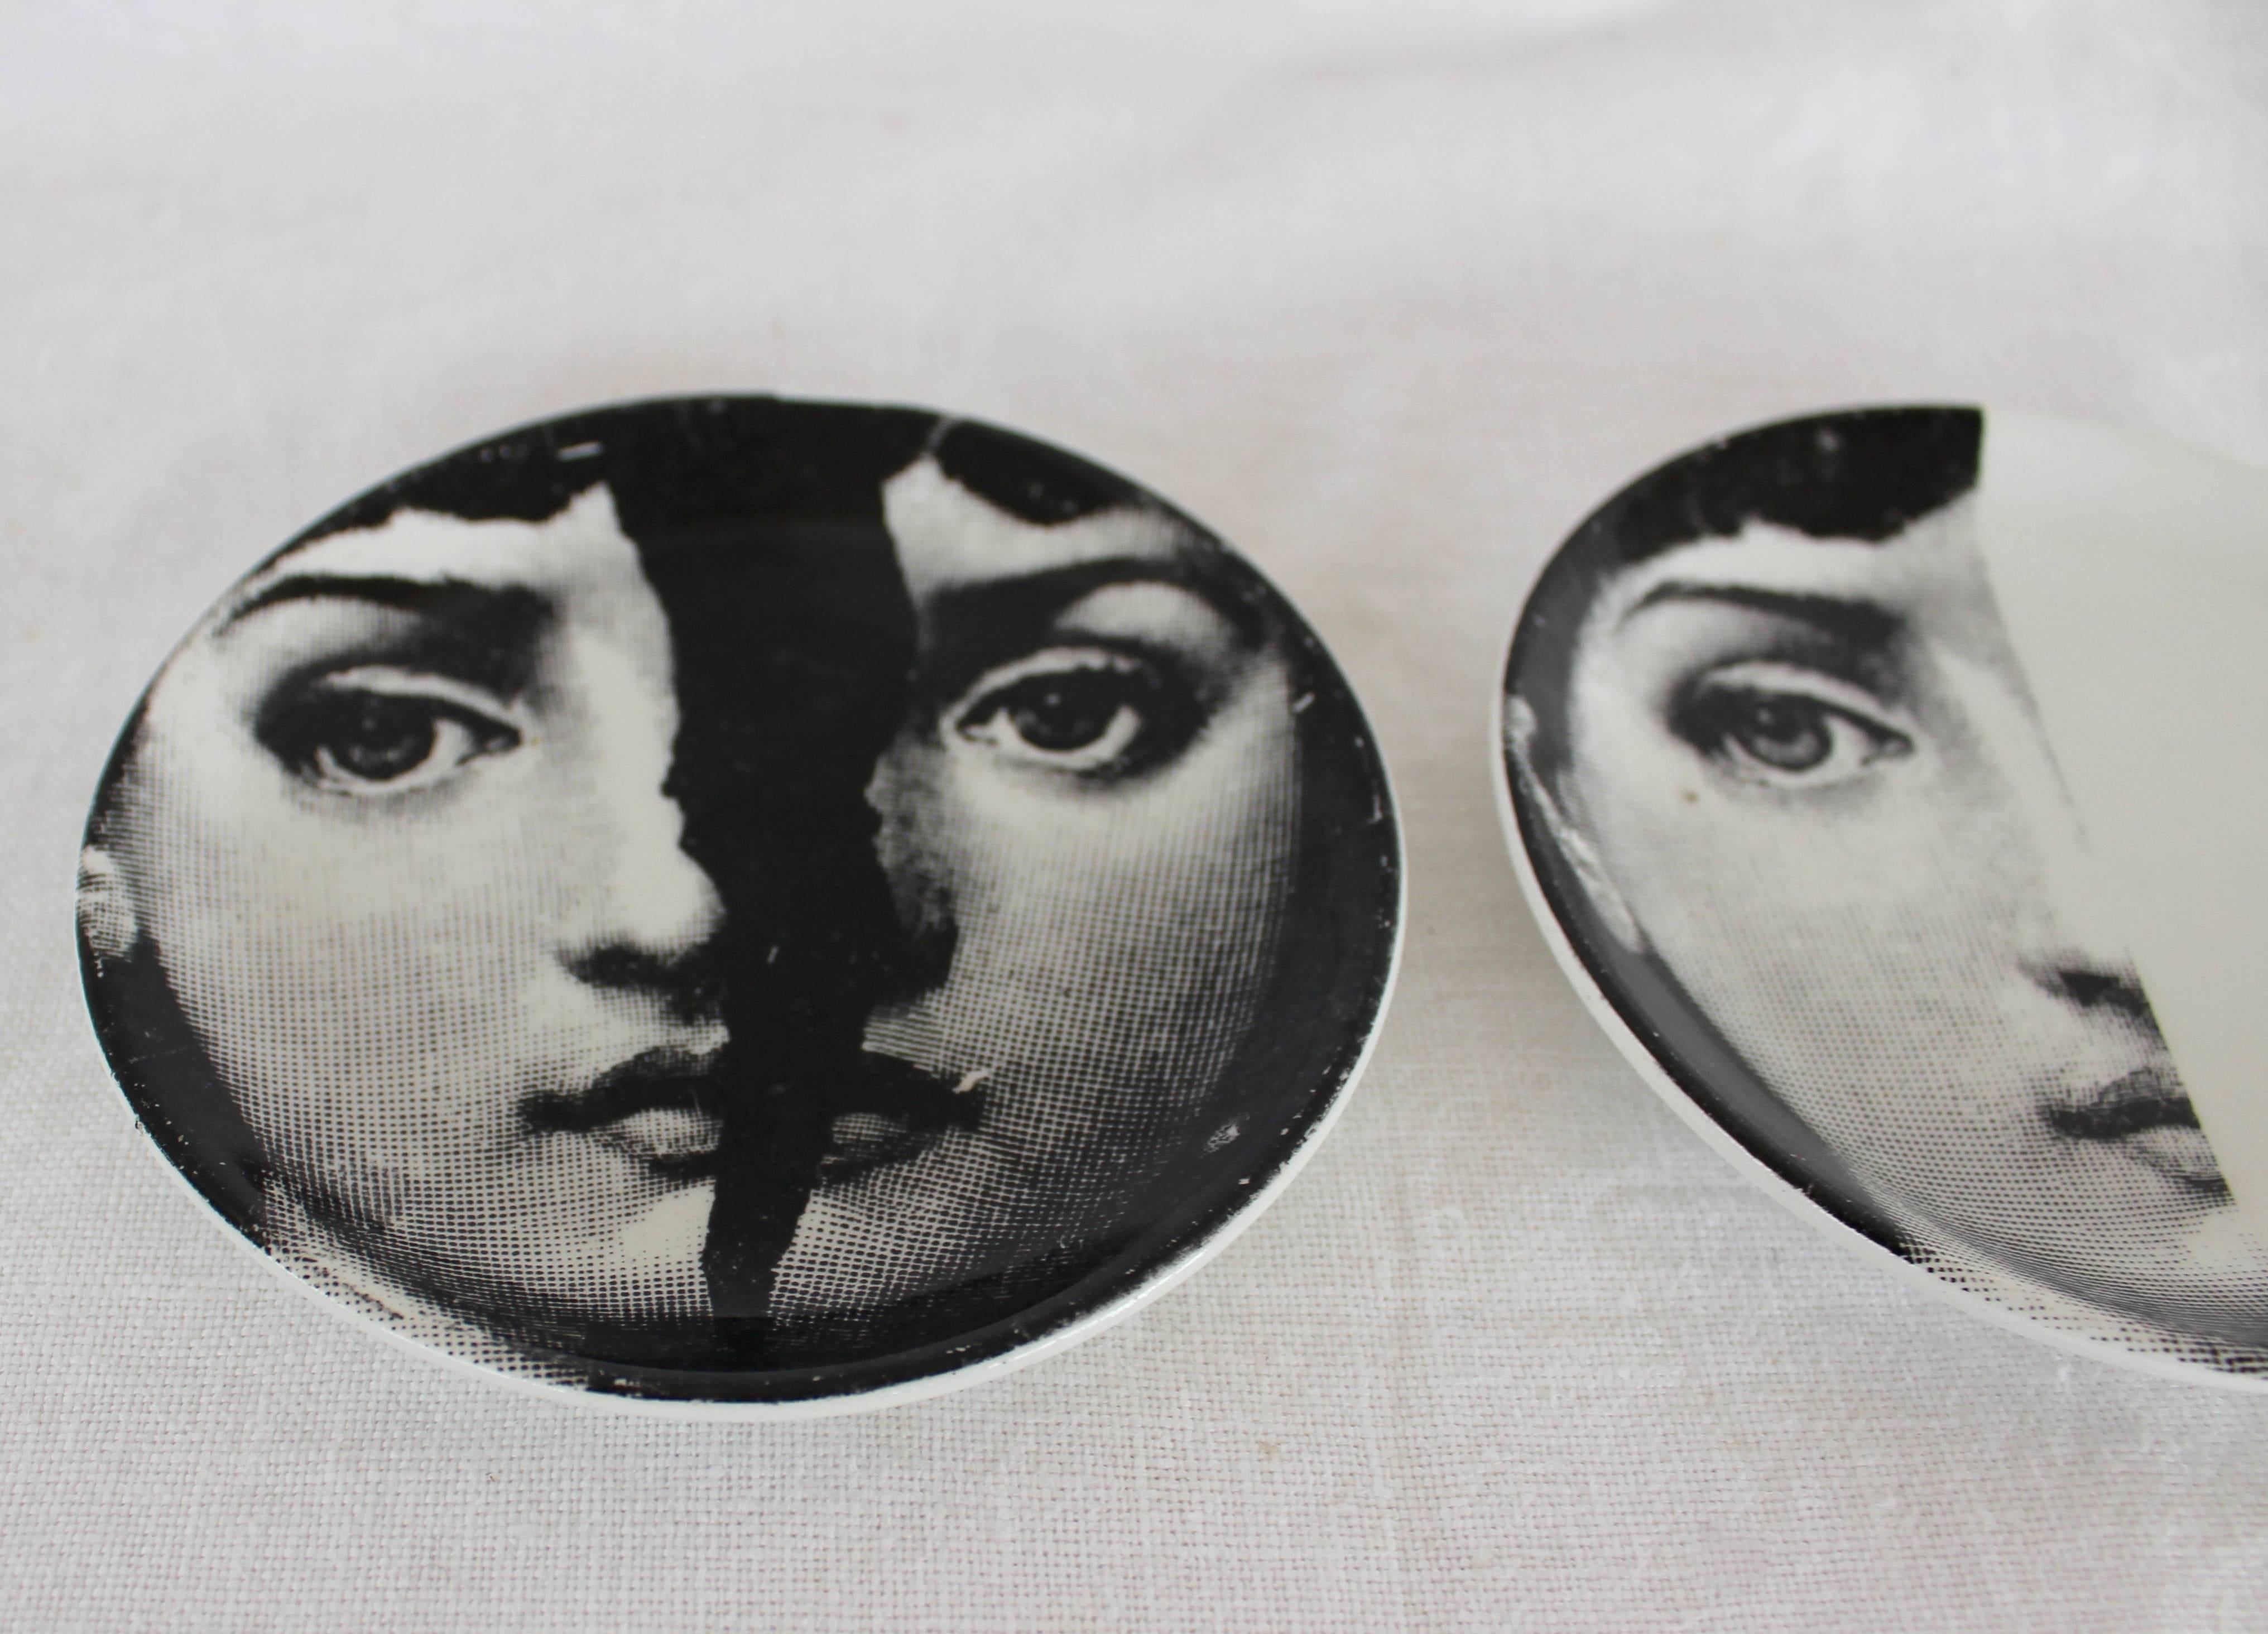 Two porcelain coasters by Piero Fornasetti.
Italy, 1960s.